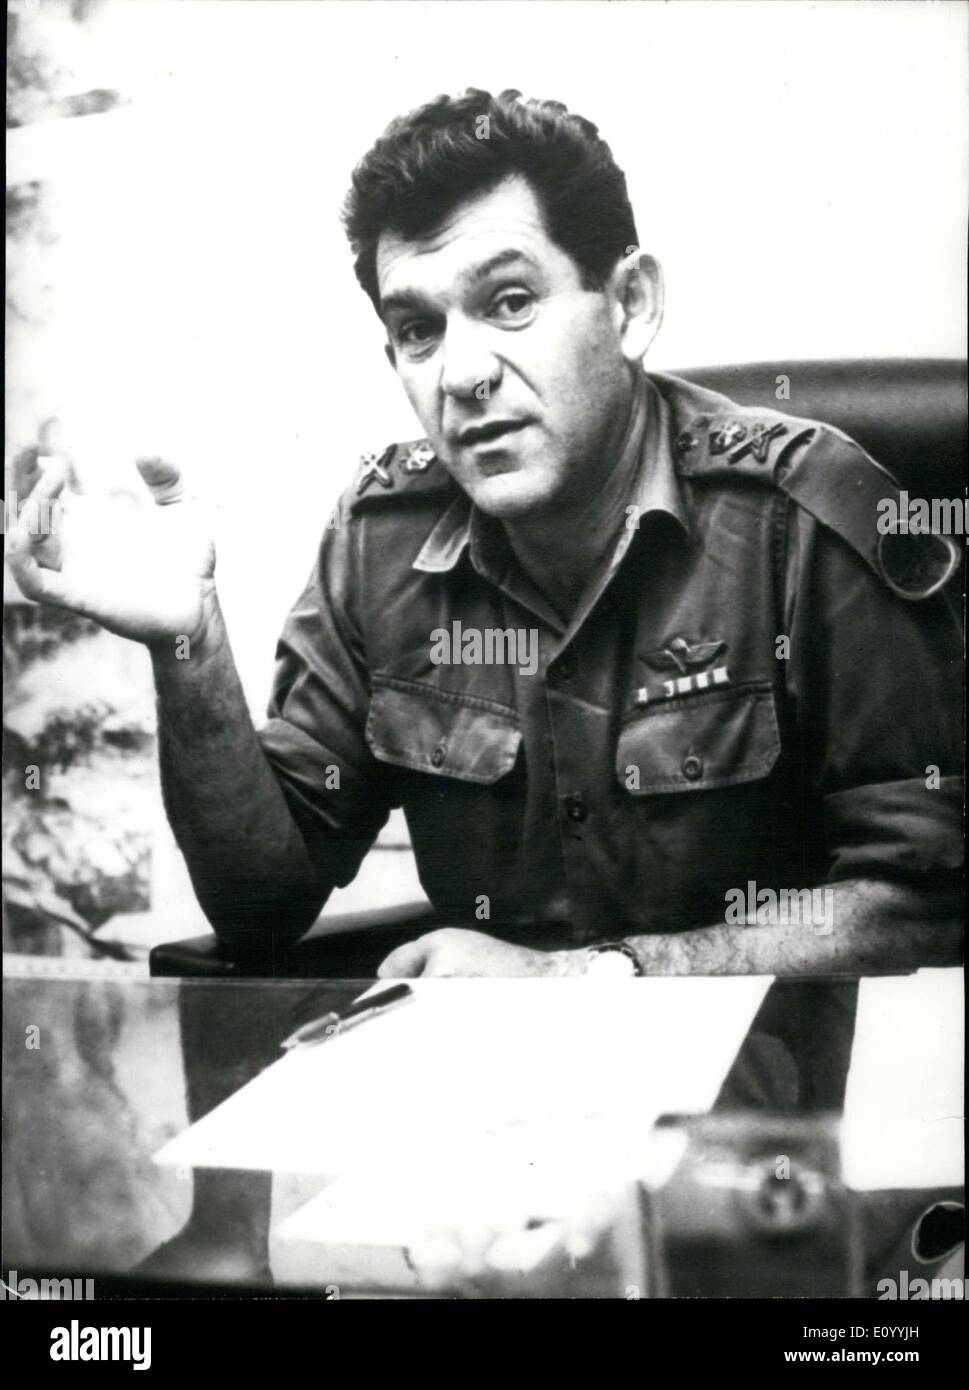 Nov. 29, 1971 - David Elazar was named as Chief of Staff for the Israeli armies and will be replacing Haim Bar Lev. Imag Stock Photo